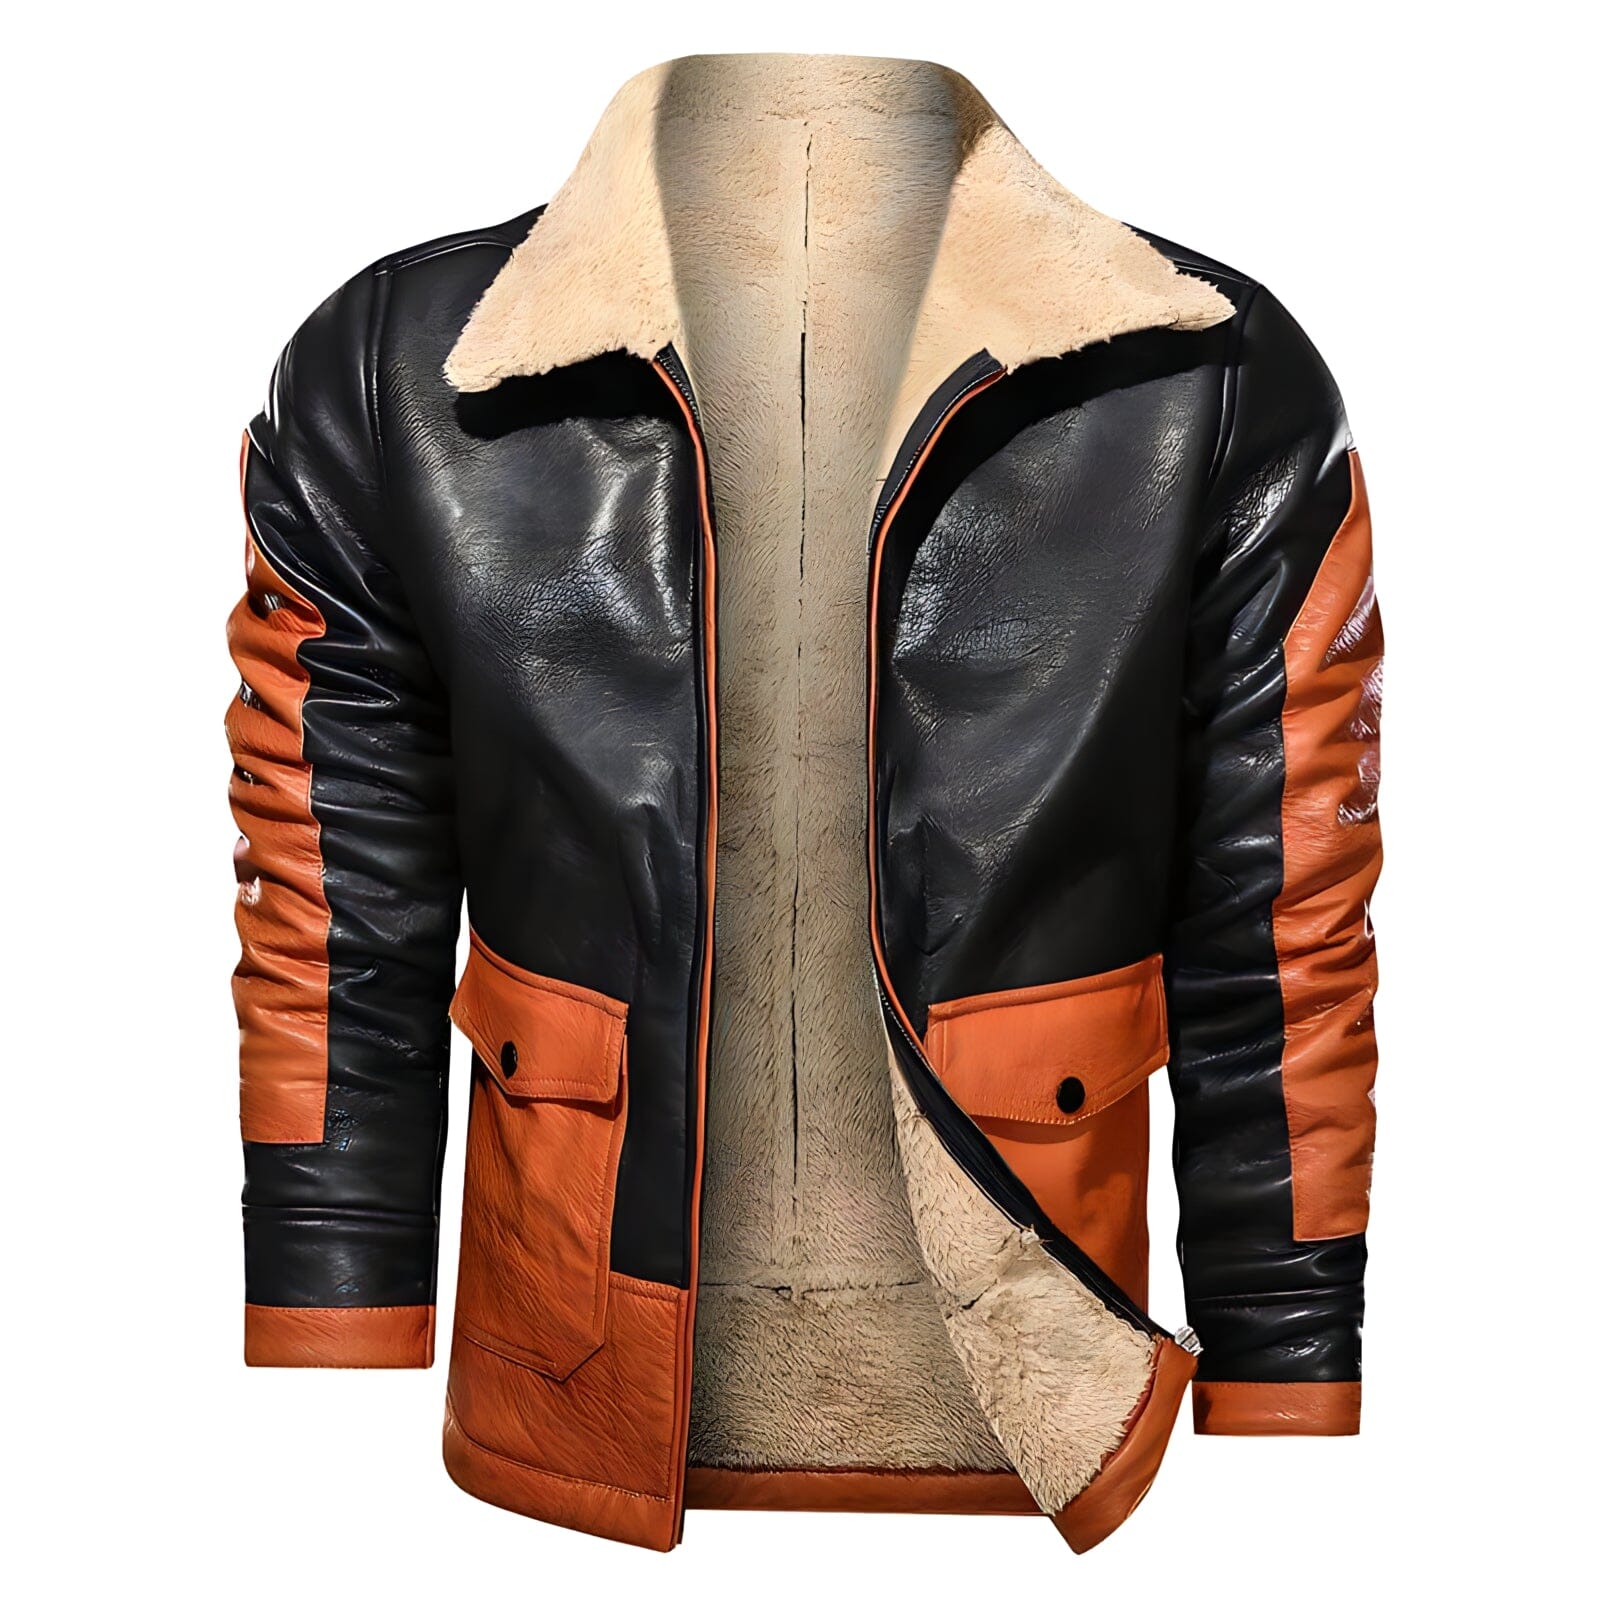 The Geo Faux Leather Jacket